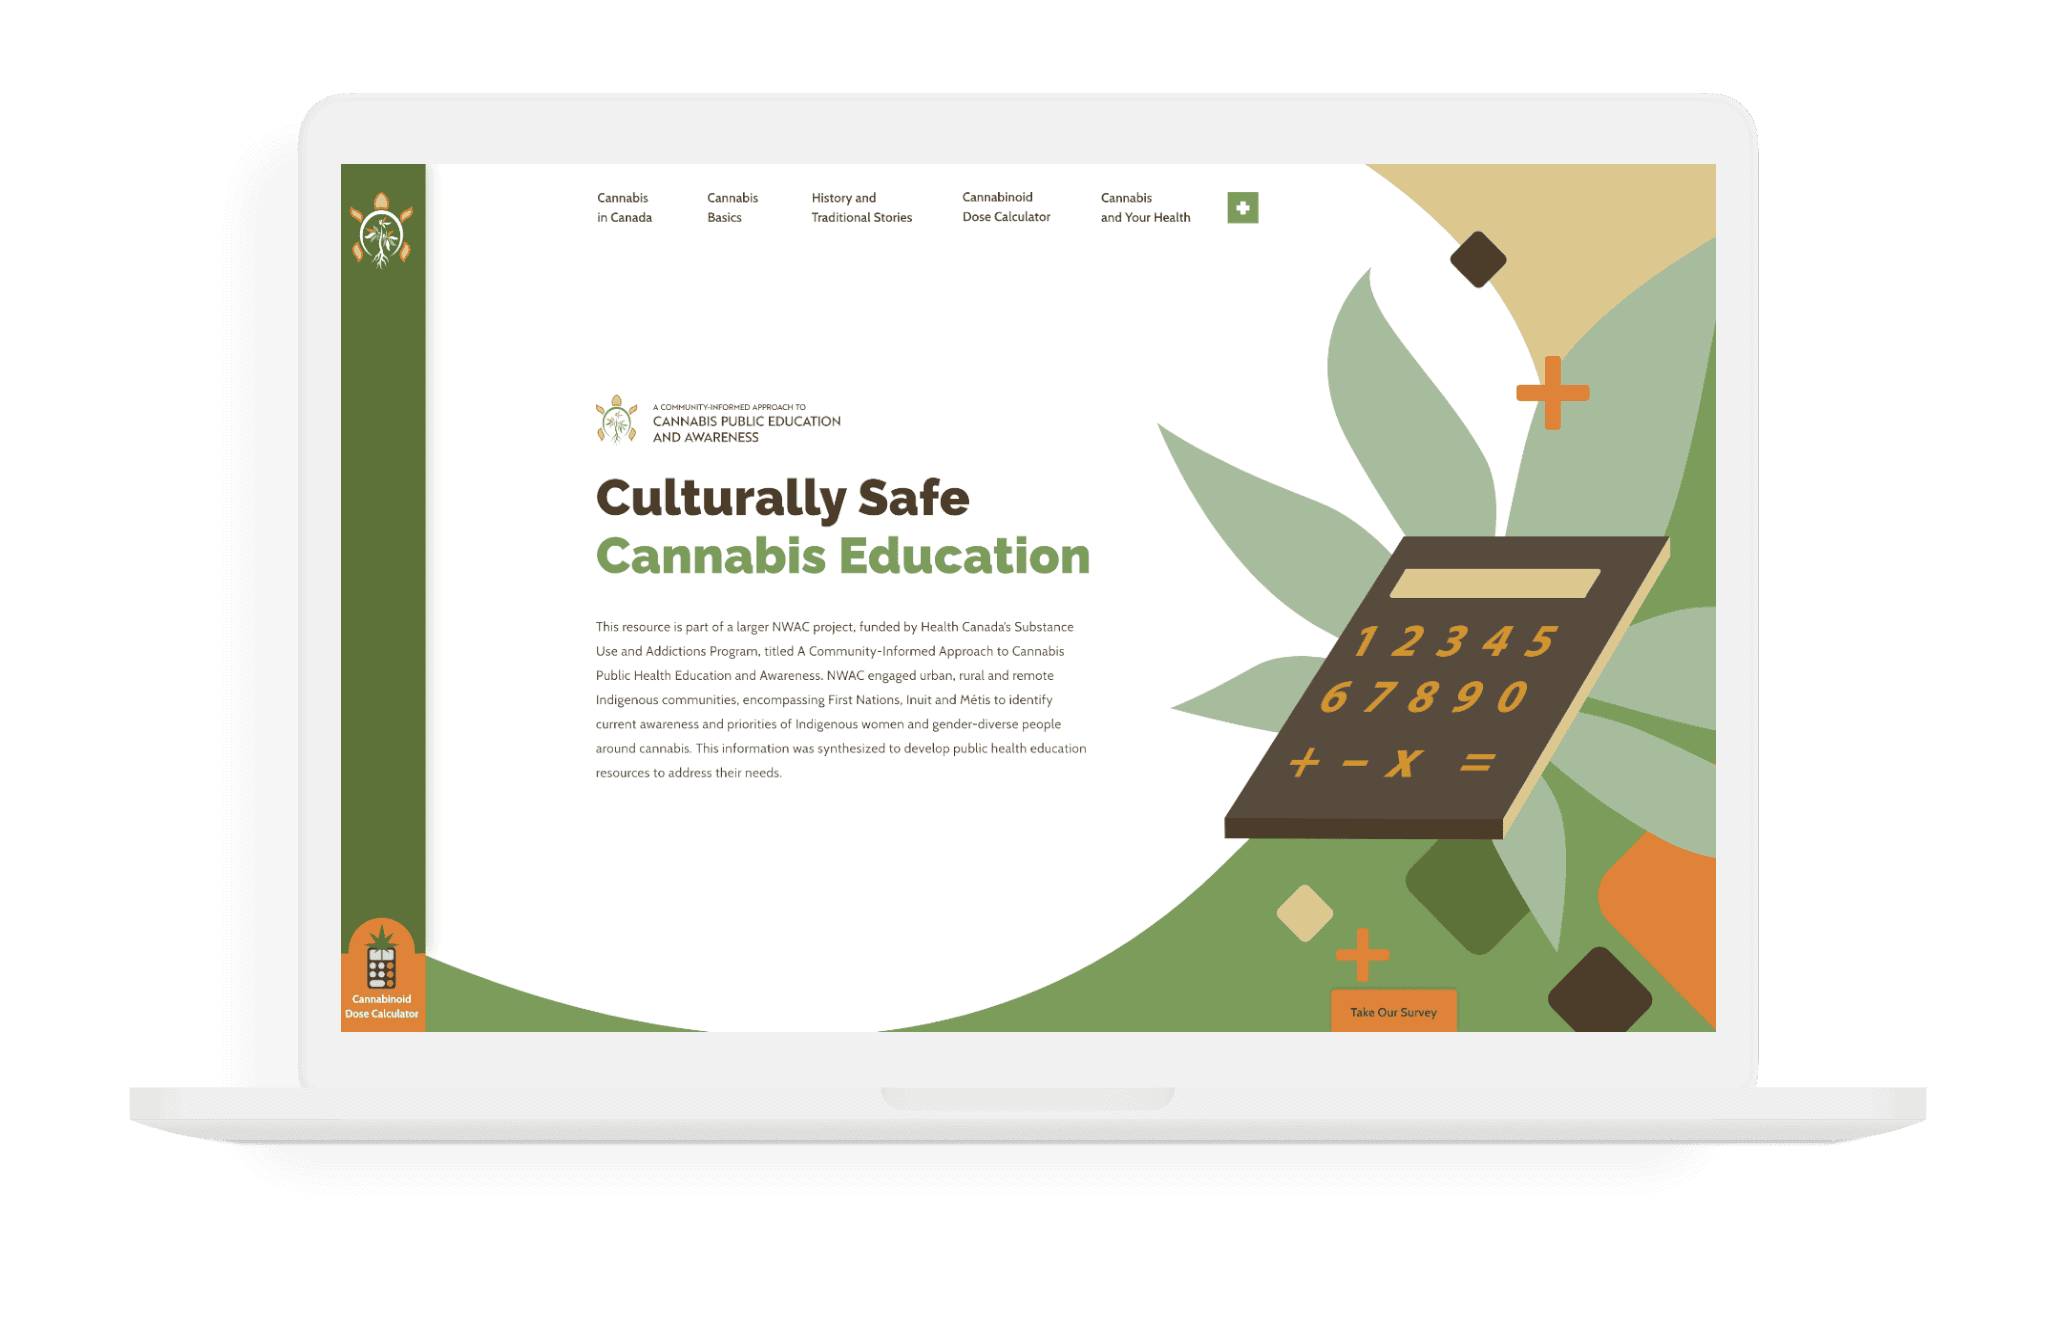 A macbook mockup of the NWAC Culturally Safe Cannabis Education homepage. The page features a calculator with a cannabis leaf underneath it, and a blurb about the goals of the Culturally Safe Cannabis Education initiative.